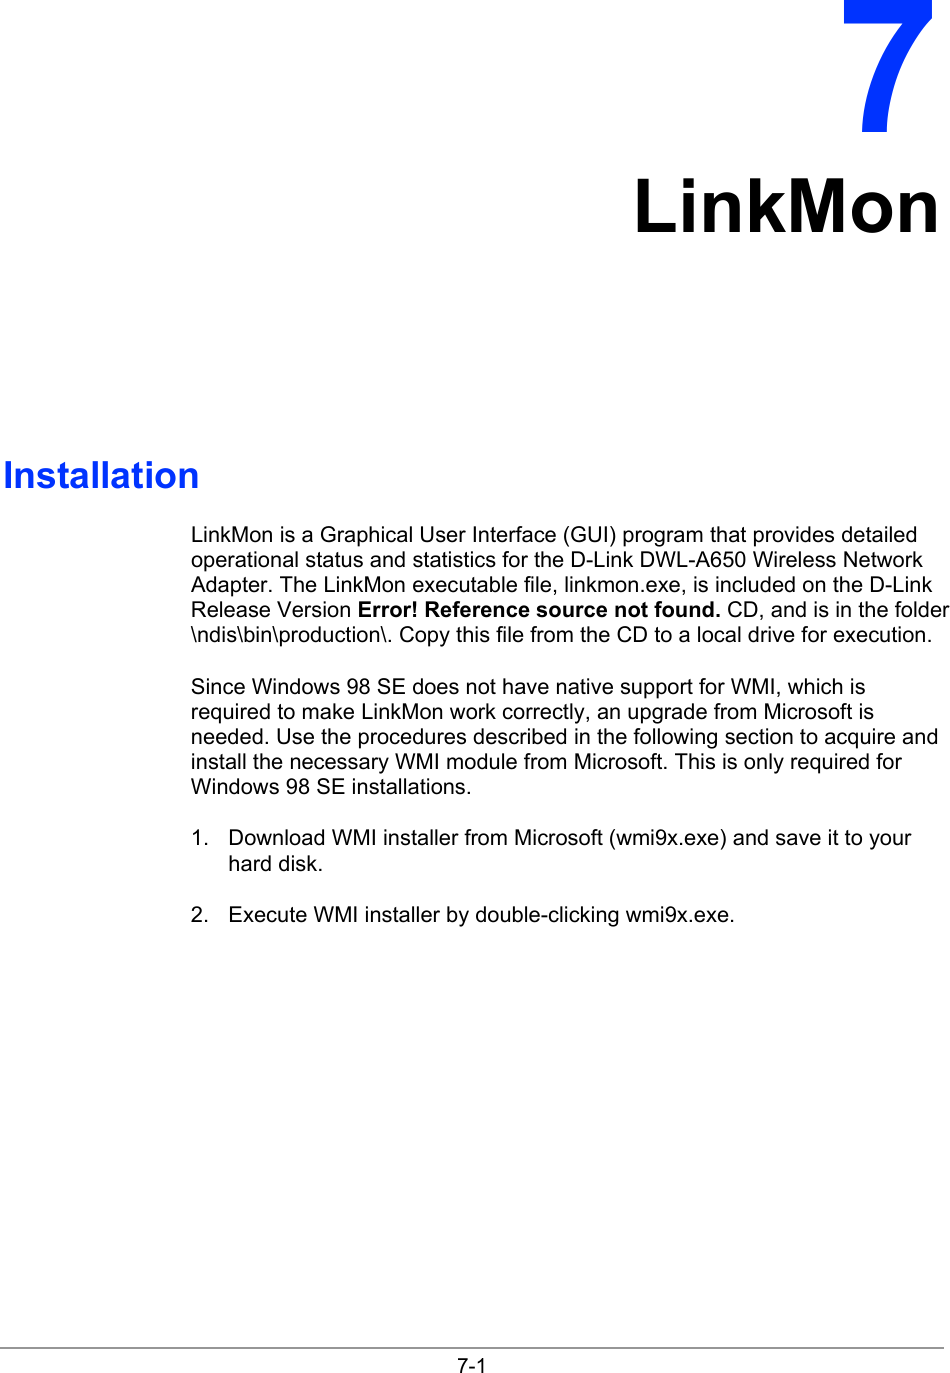  7-1 7 LinkMon Installation LinkMon is a Graphical User Interface (GUI) program that provides detailed operational status and statistics for the D-Link DWL-A650 Wireless Network Adapter. The LinkMon executable file, linkmon.exe, is included on the D-Link Release Version Error! Reference source not found. CD, and is in the folder \ndis\bin\production\. Copy this file from the CD to a local drive for execution.  Since Windows 98 SE does not have native support for WMI, which is required to make LinkMon work correctly, an upgrade from Microsoft is needed. Use the procedures described in the following section to acquire and install the necessary WMI module from Microsoft. This is only required for Windows 98 SE installations. 1.  Download WMI installer from Microsoft (wmi9x.exe) and save it to your hard disk. 2.  Execute WMI installer by double-clicking wmi9x.exe. 